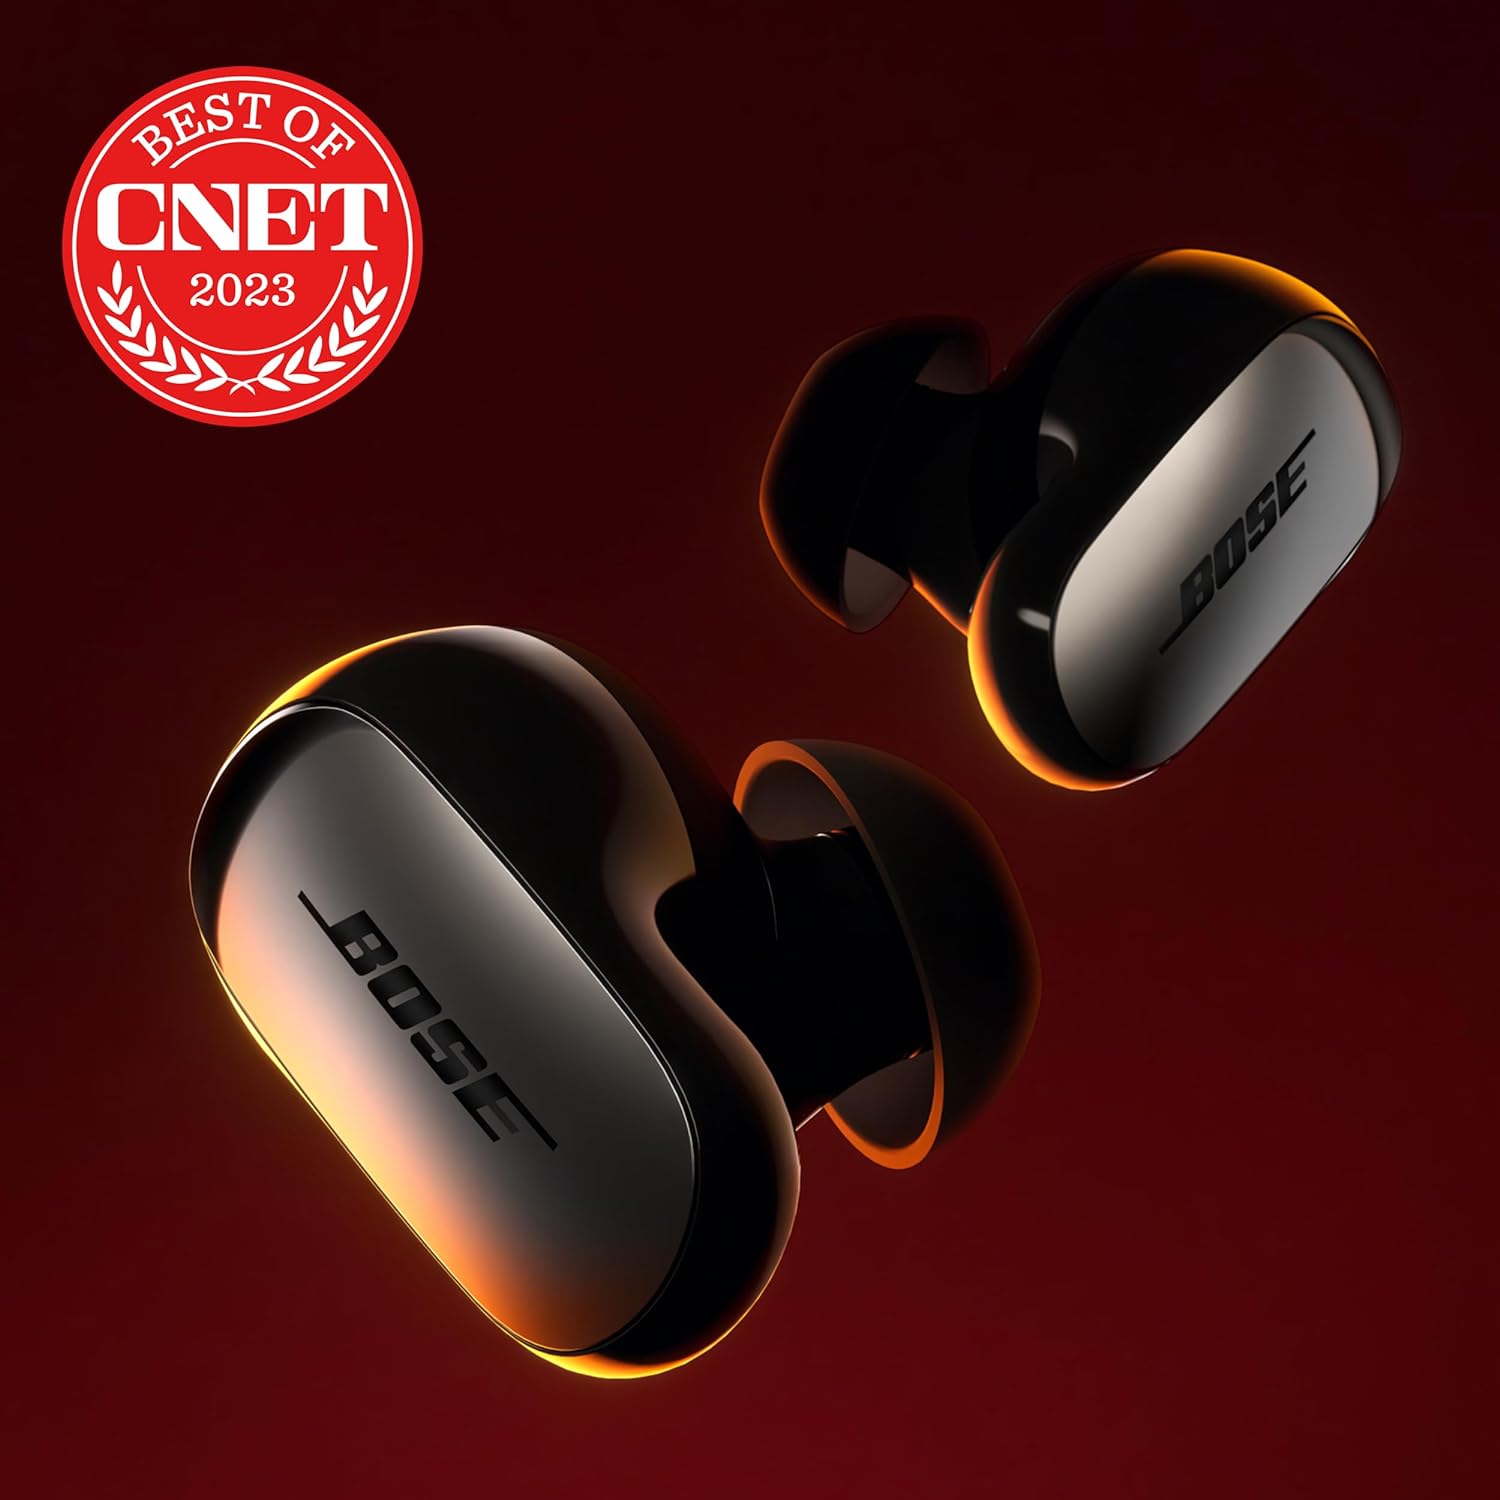 CustomTune Technology for World-Class Noise Cancellation - Tailored premium sound just for you. 0017817847681